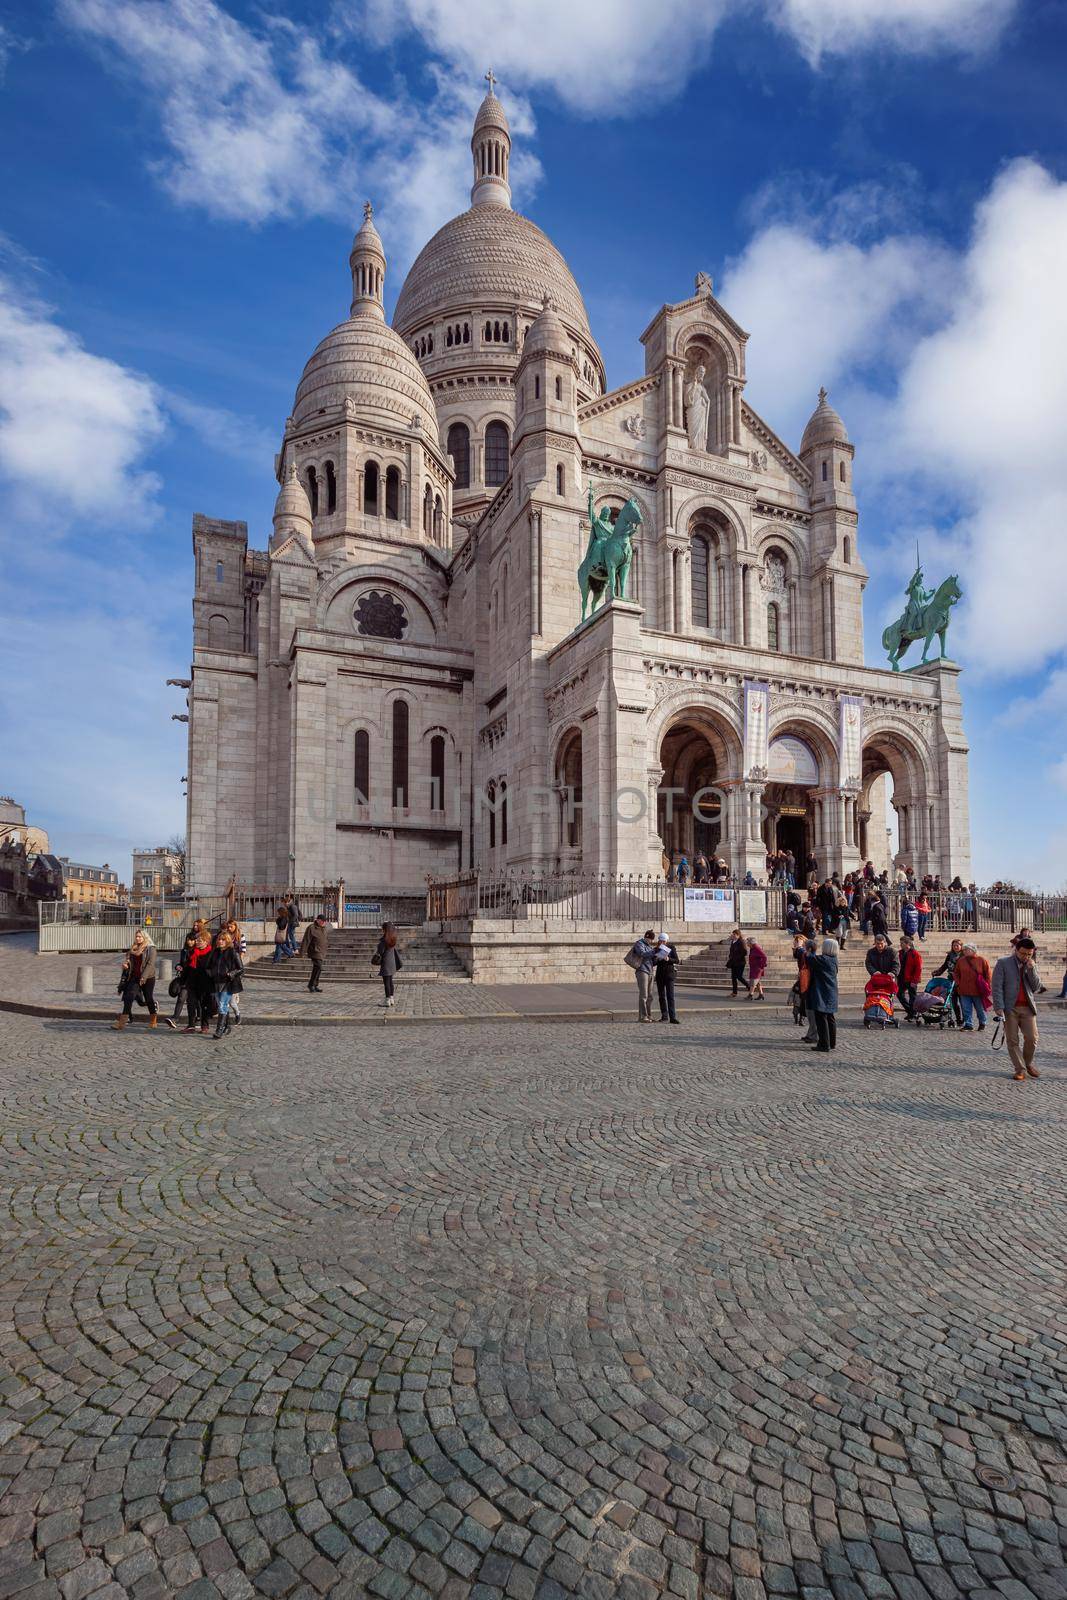 Paris - April 6, 2013: Tourists near the Basilica of the Sacred Heart of Paris (Sacre-Coeur). It is a the highest point in the city and popular landmark, and the second-most visited monument in Paris.